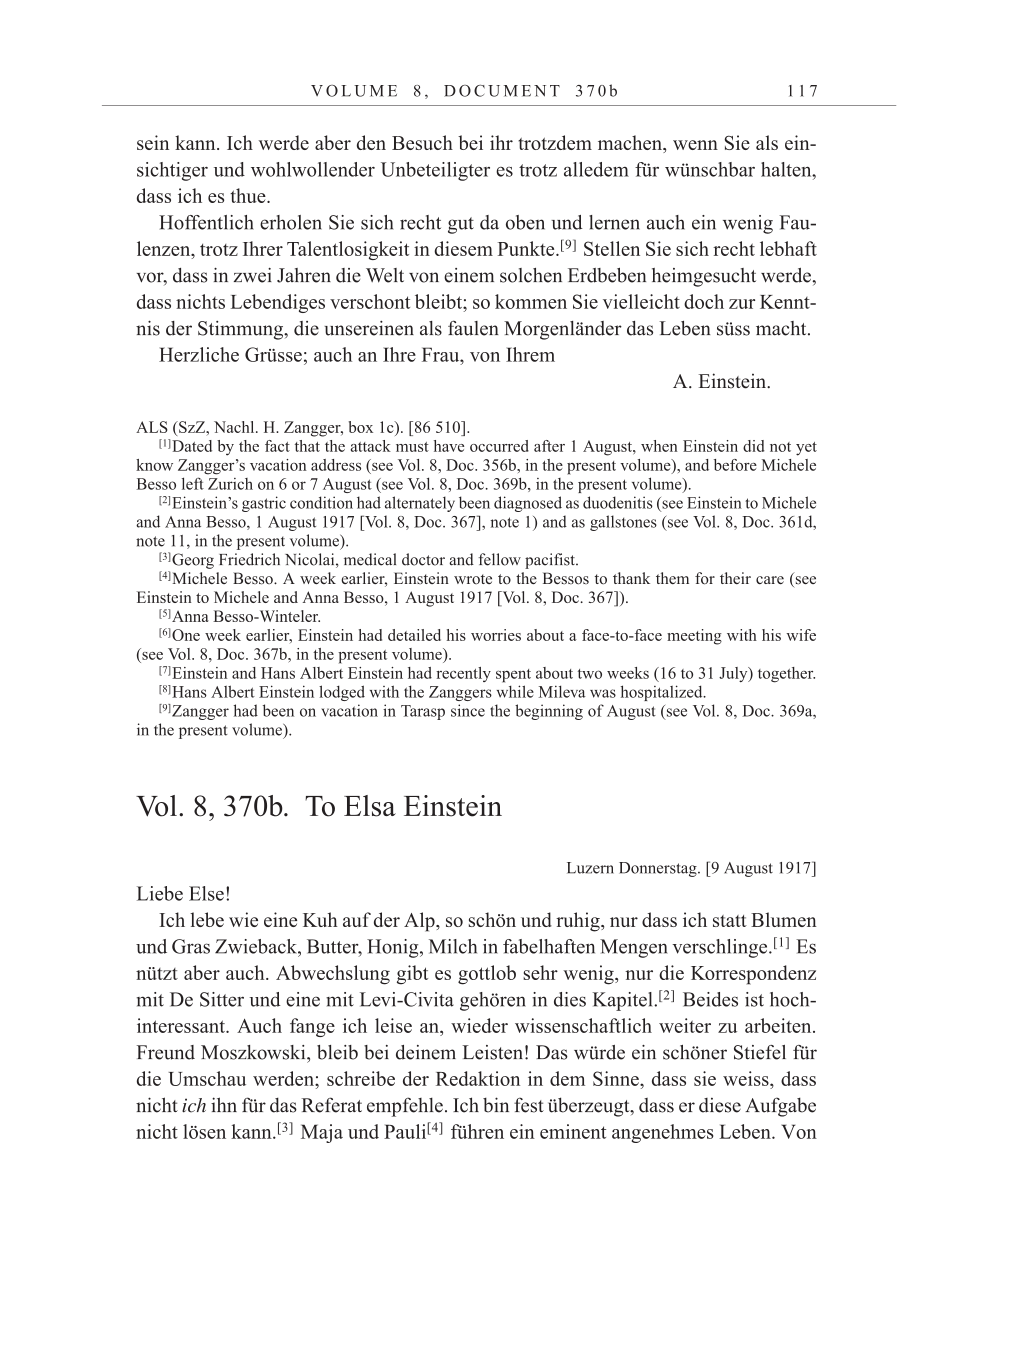 Volume 10: The Berlin Years: Correspondence May-December 1920 / Supplementary Correspondence 1909-1920 page 117